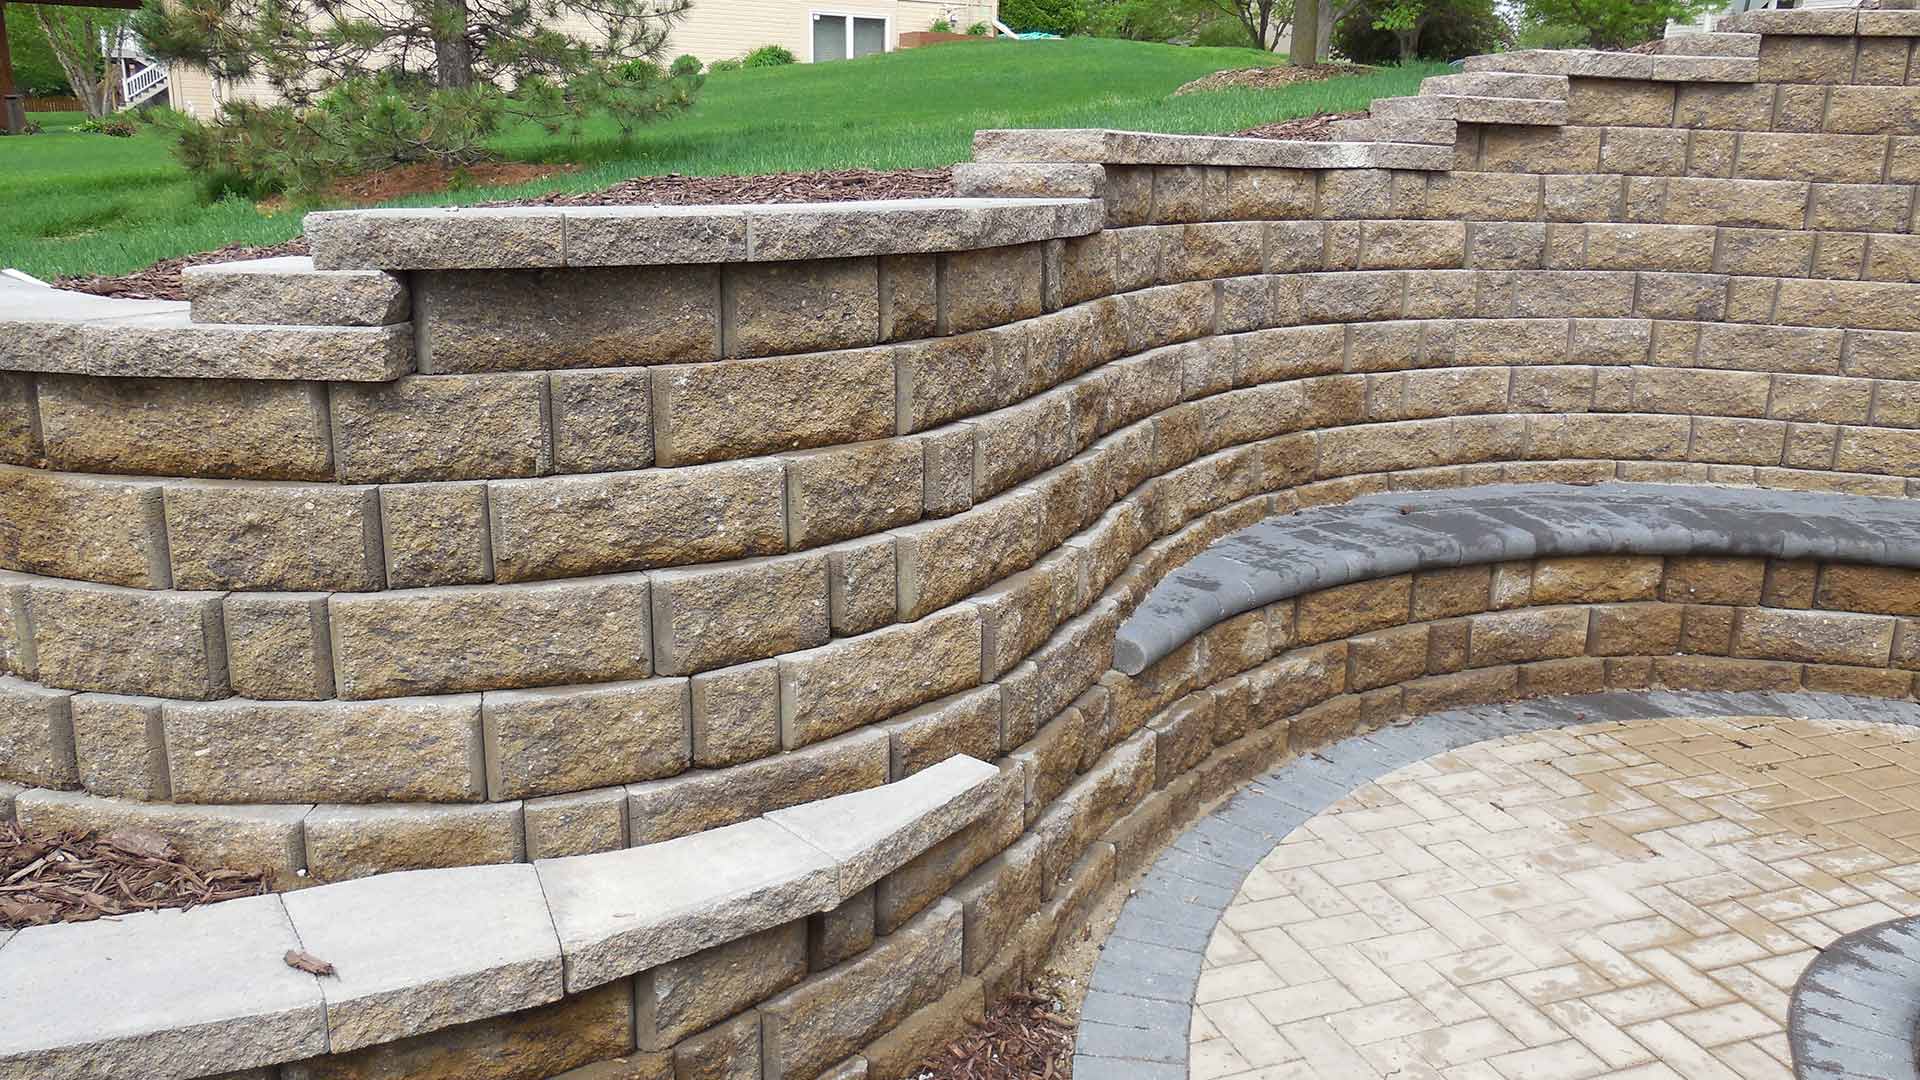 Curved retaining wall installed in Gretna, NE.